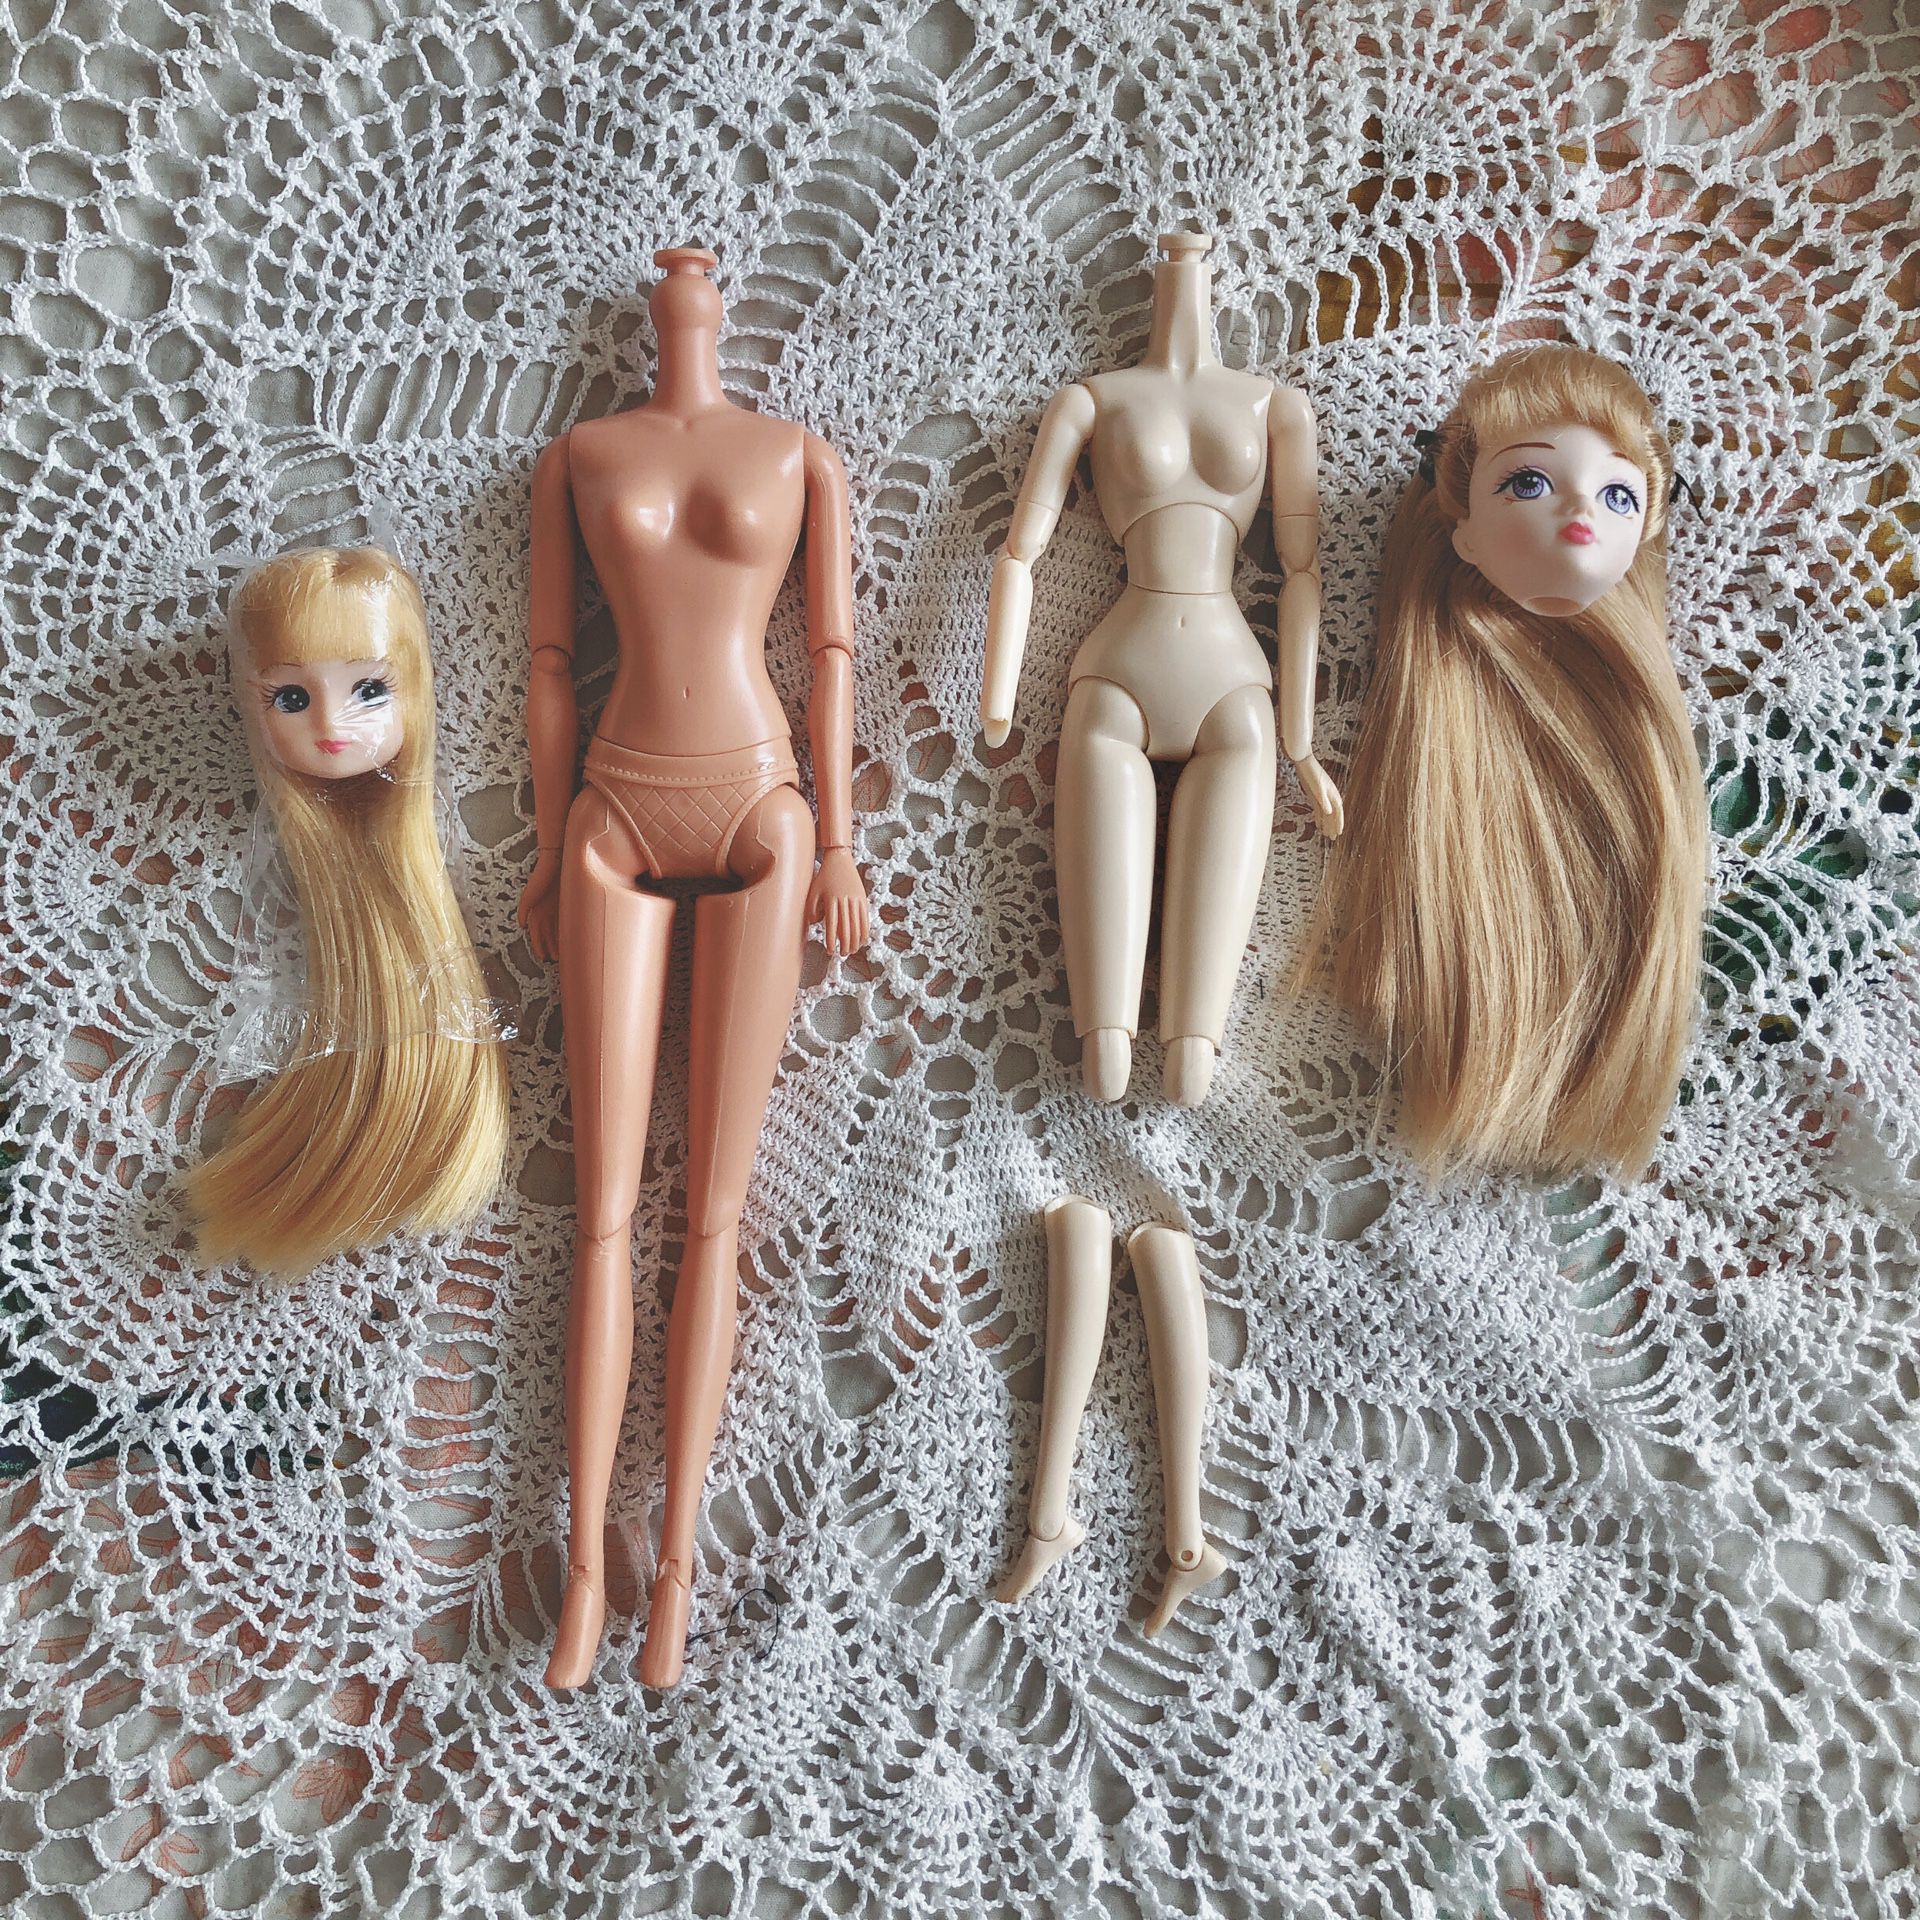 Lot of 1/6 doll bodies and heads Licca-chan Kurhn Pullip simba articulated bjd parts repair